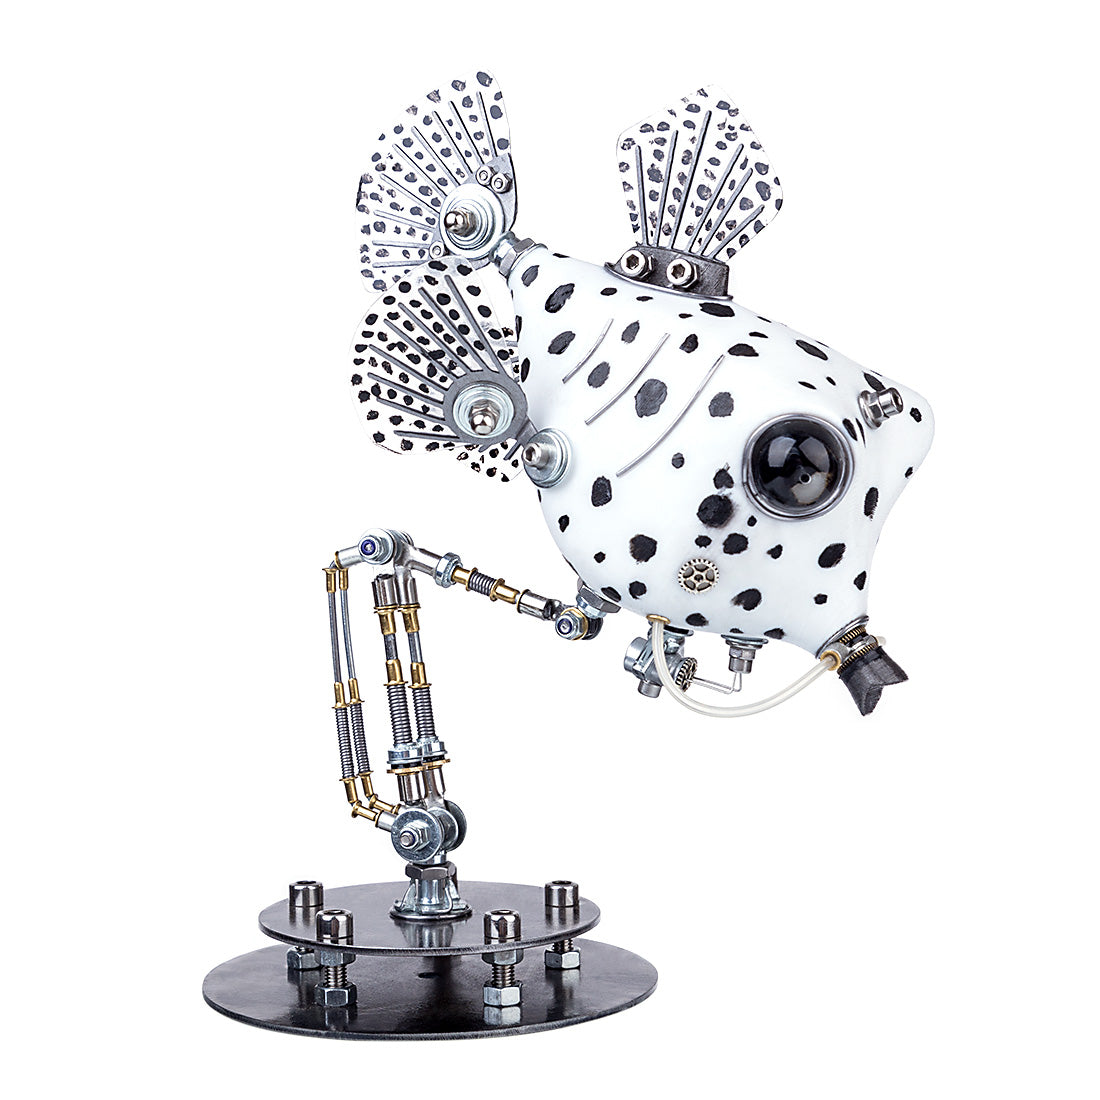 Metal Black & White Cowfish Model Kits 3D Handmade Assembled Steampunk Crafts for Home Decor